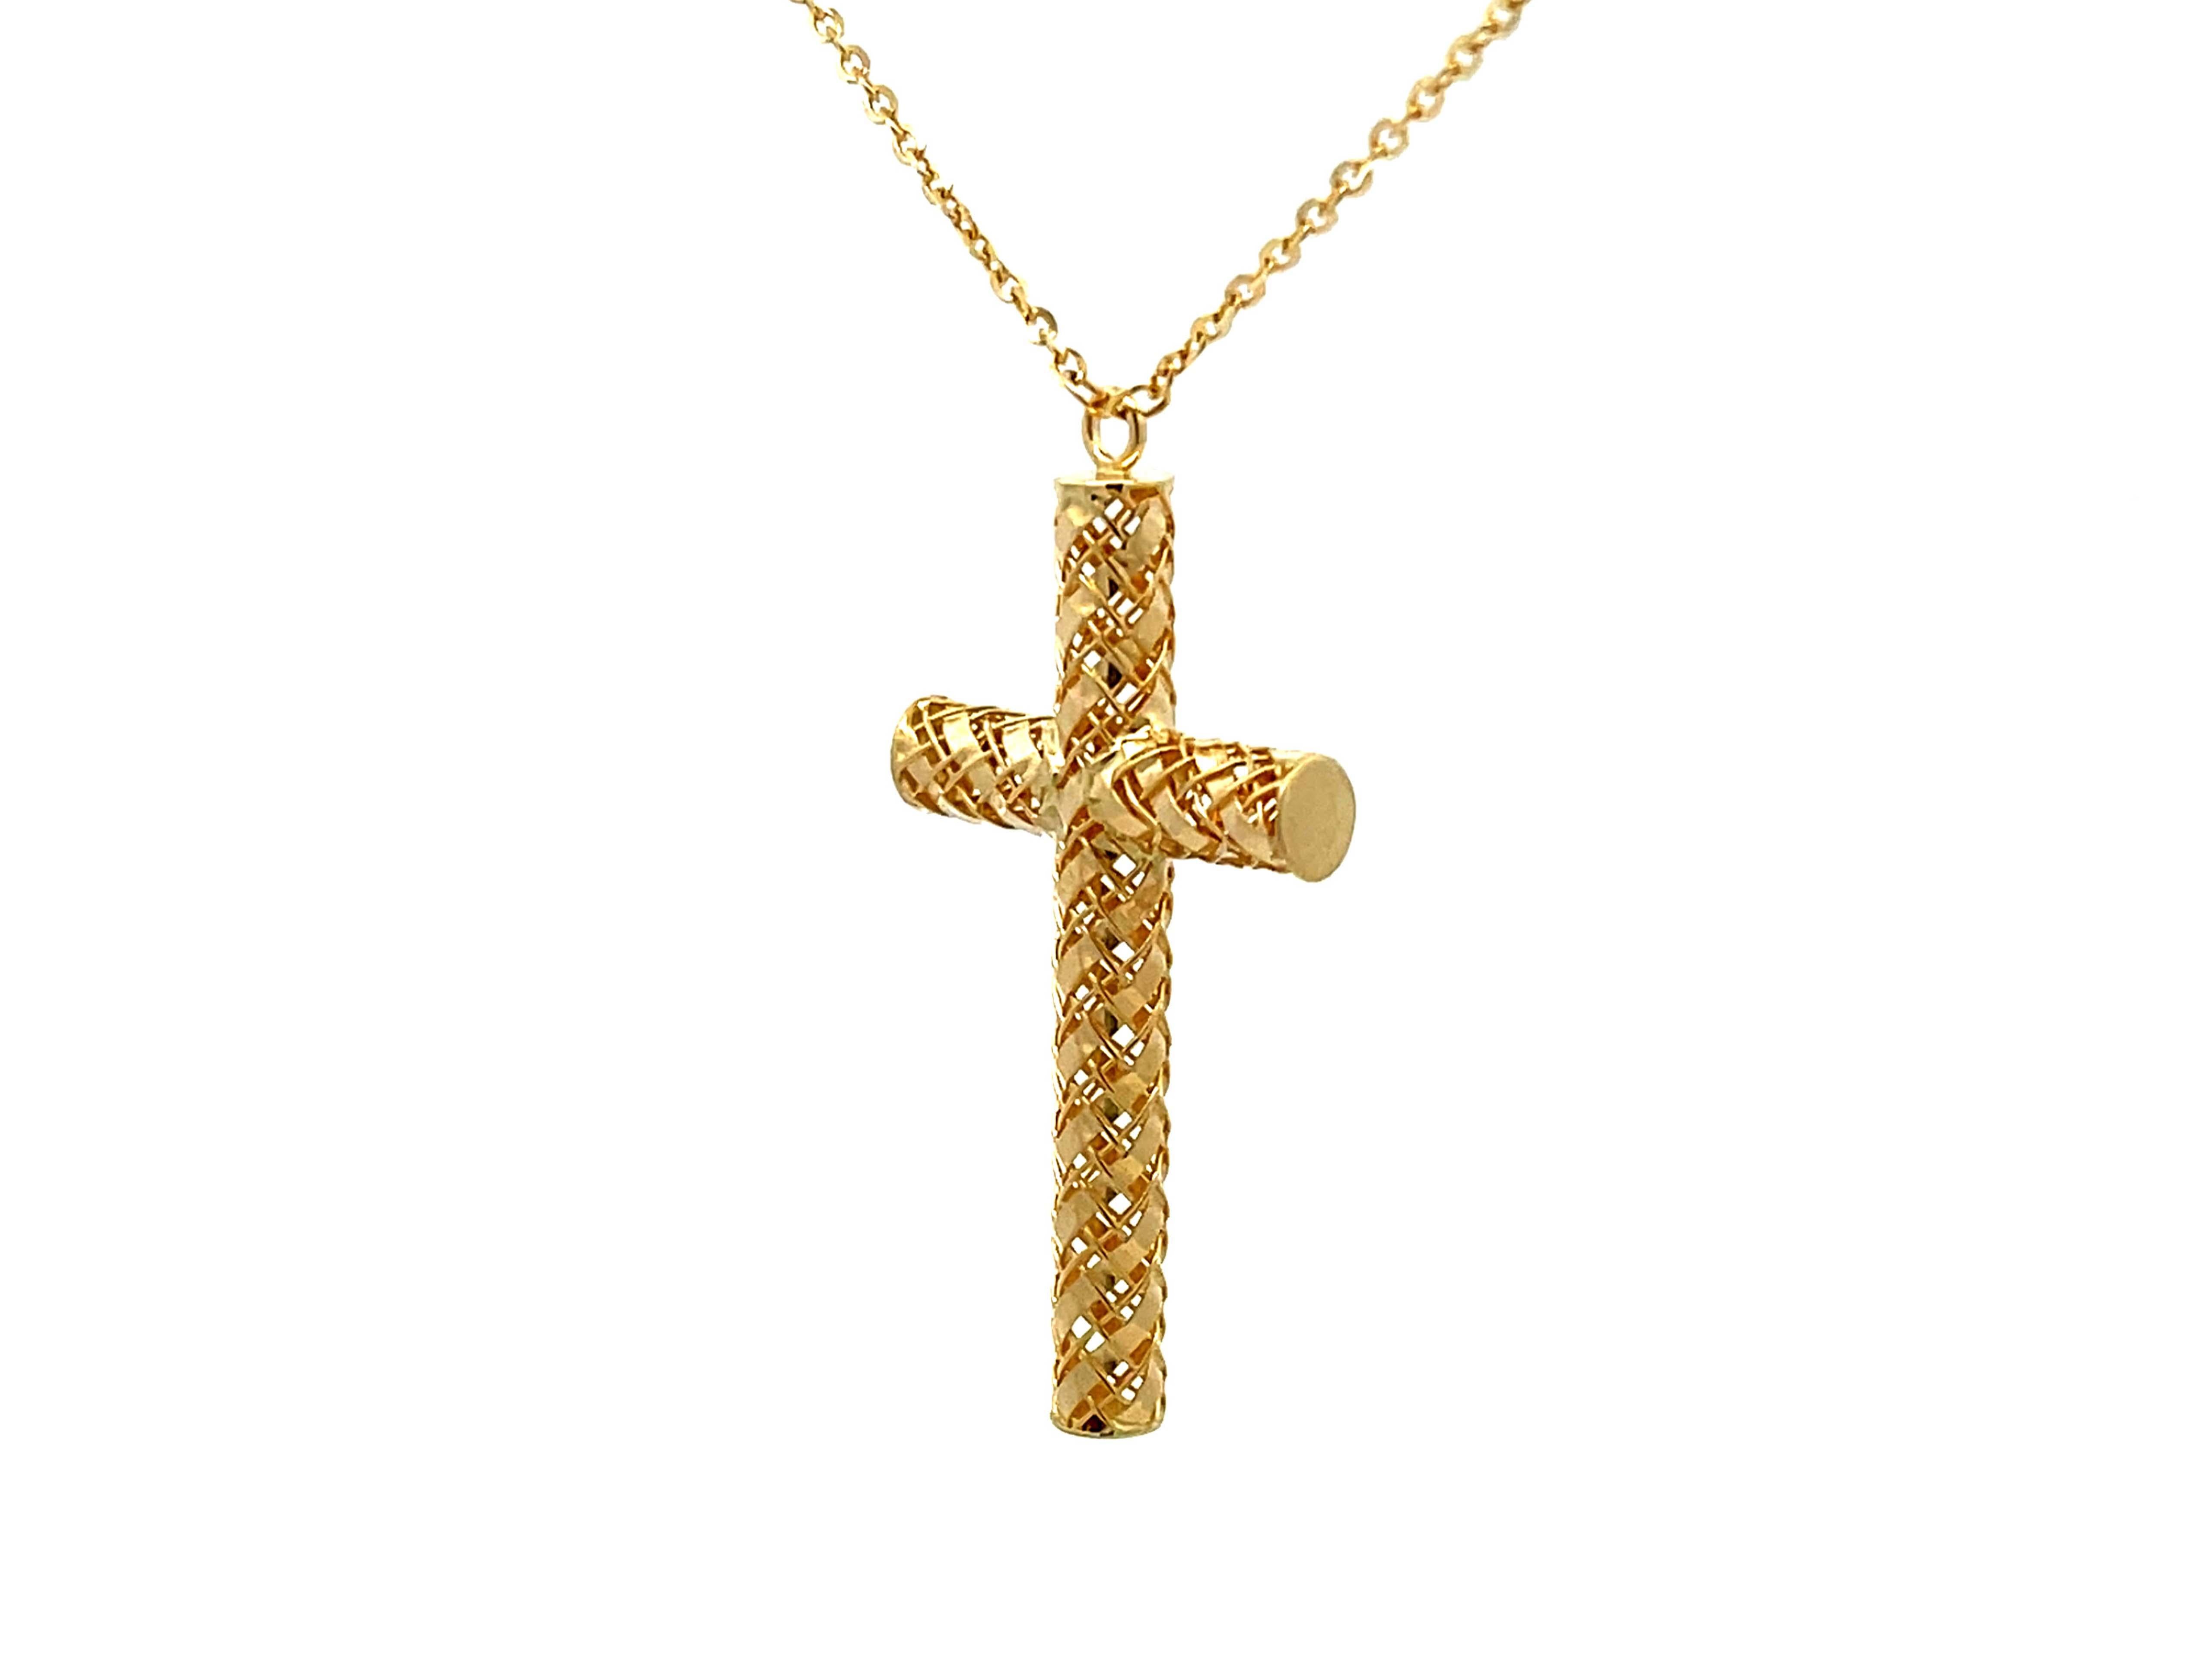 Textured Gold Cross Necklace in 14Karat Yellow Gold In Excellent Condition For Sale In Honolulu, HI